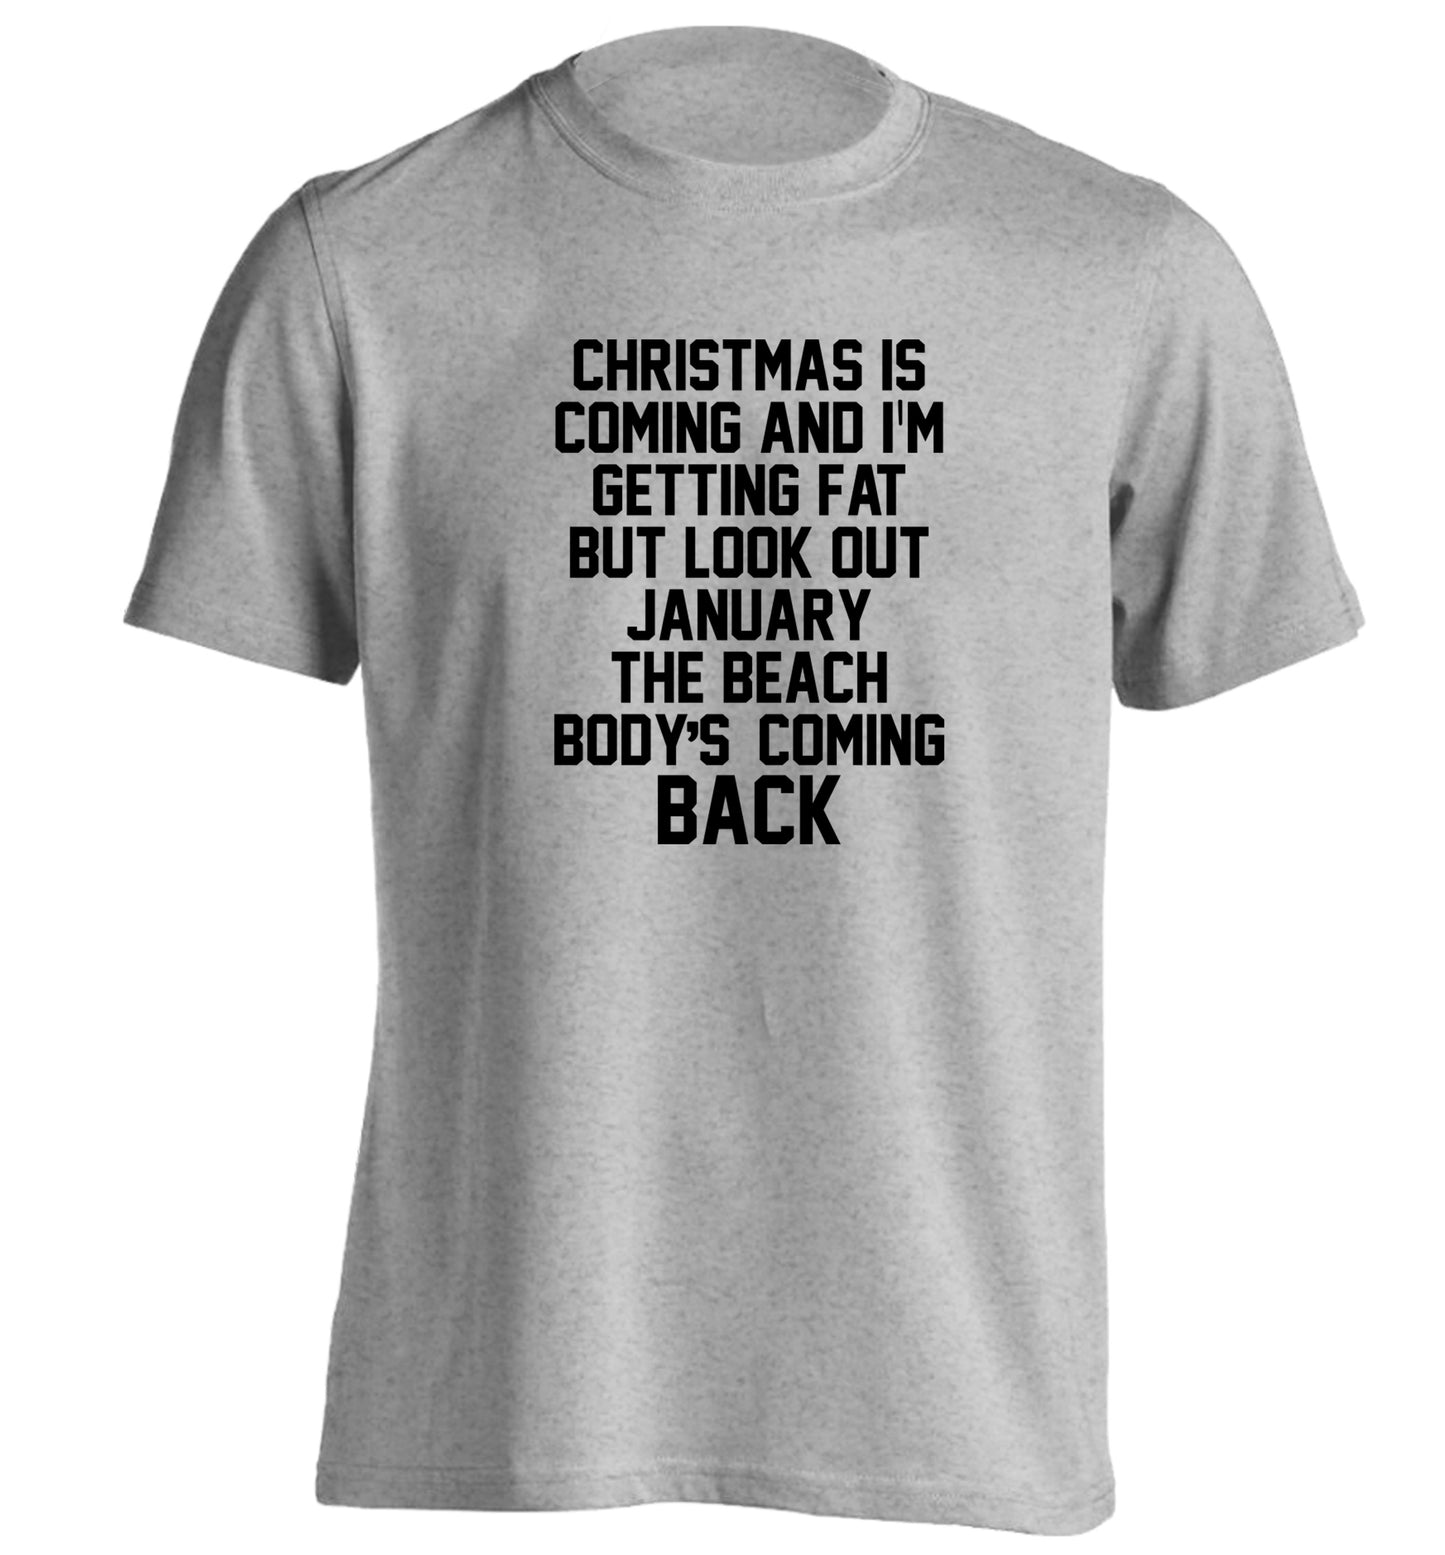 Christmas is coming and I'm getting fat but look out January the beach body's coming back! adults unisex grey Tshirt 2XL